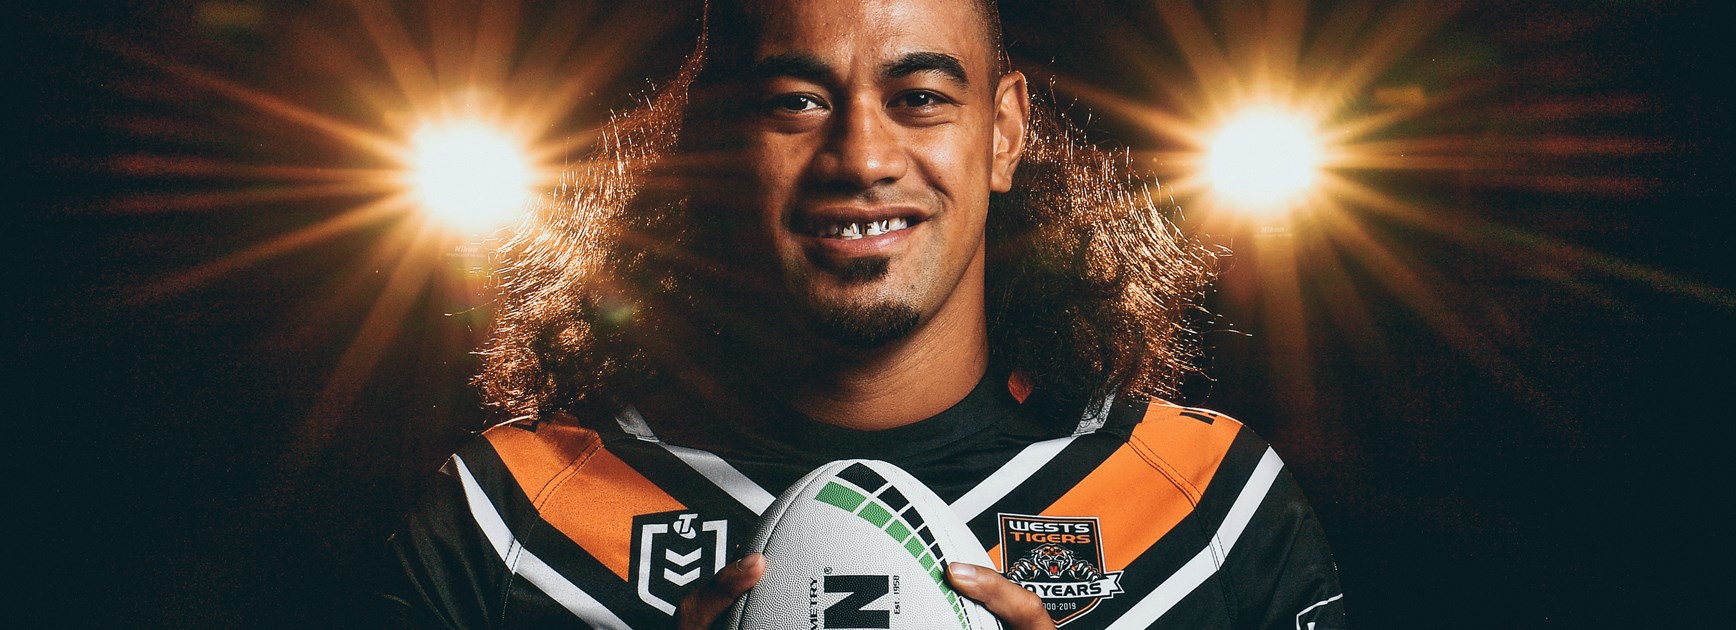 Wests Tigers Fantasy Analysis: CTR